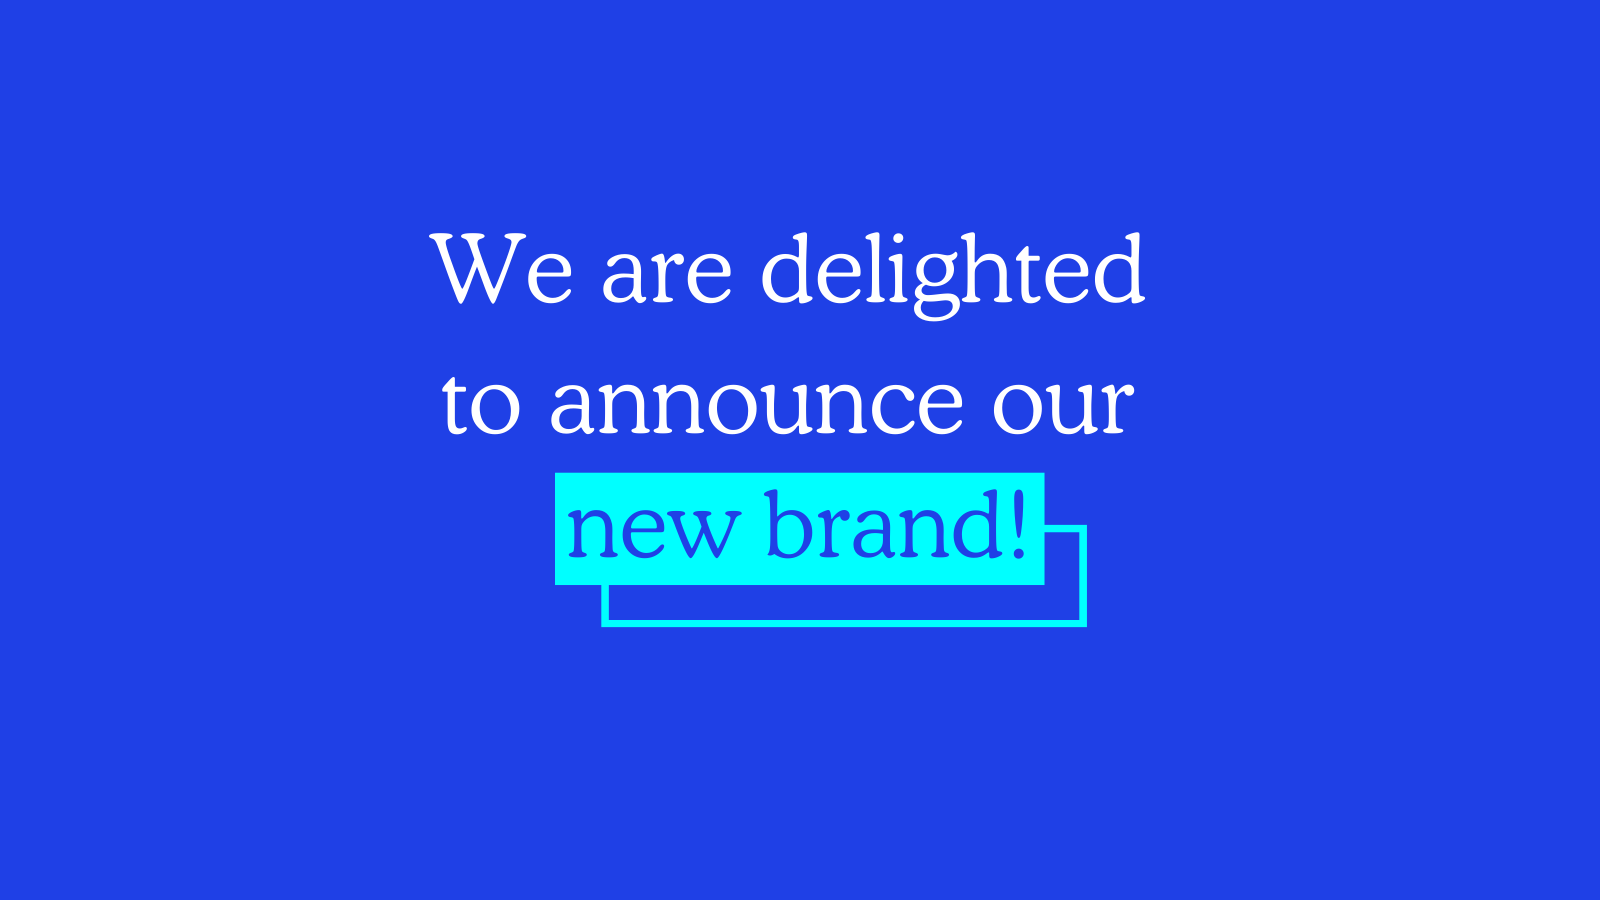 We are delighted to announce our new brand!